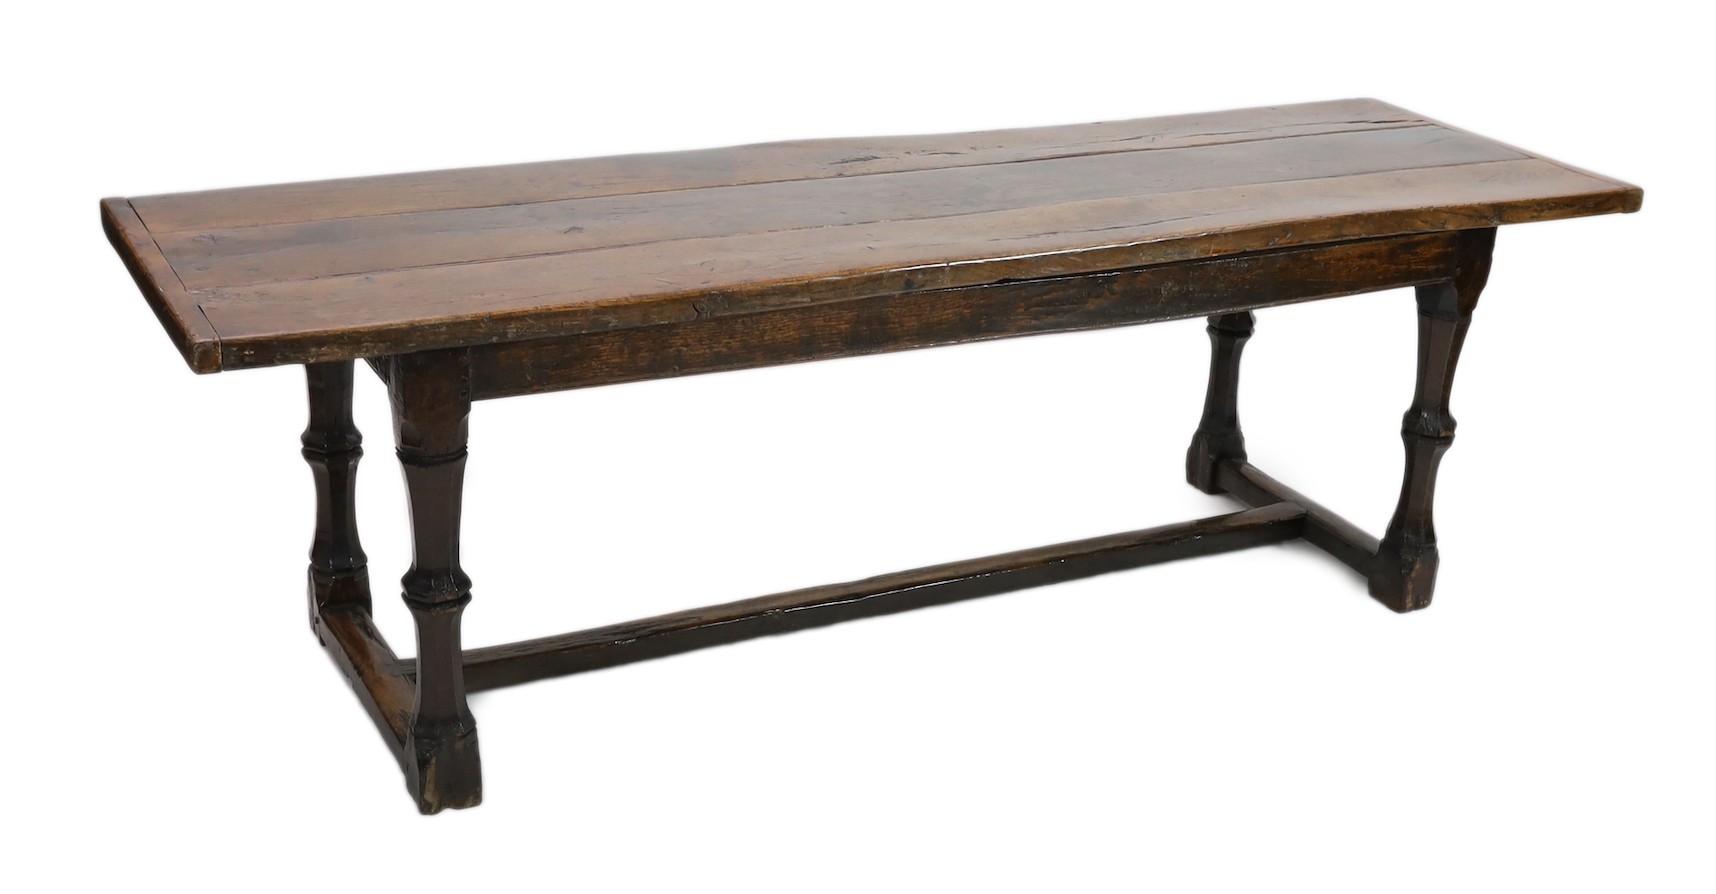 A Charles I oak refectory table, c.1630, 253 x 77cm, height 79cm